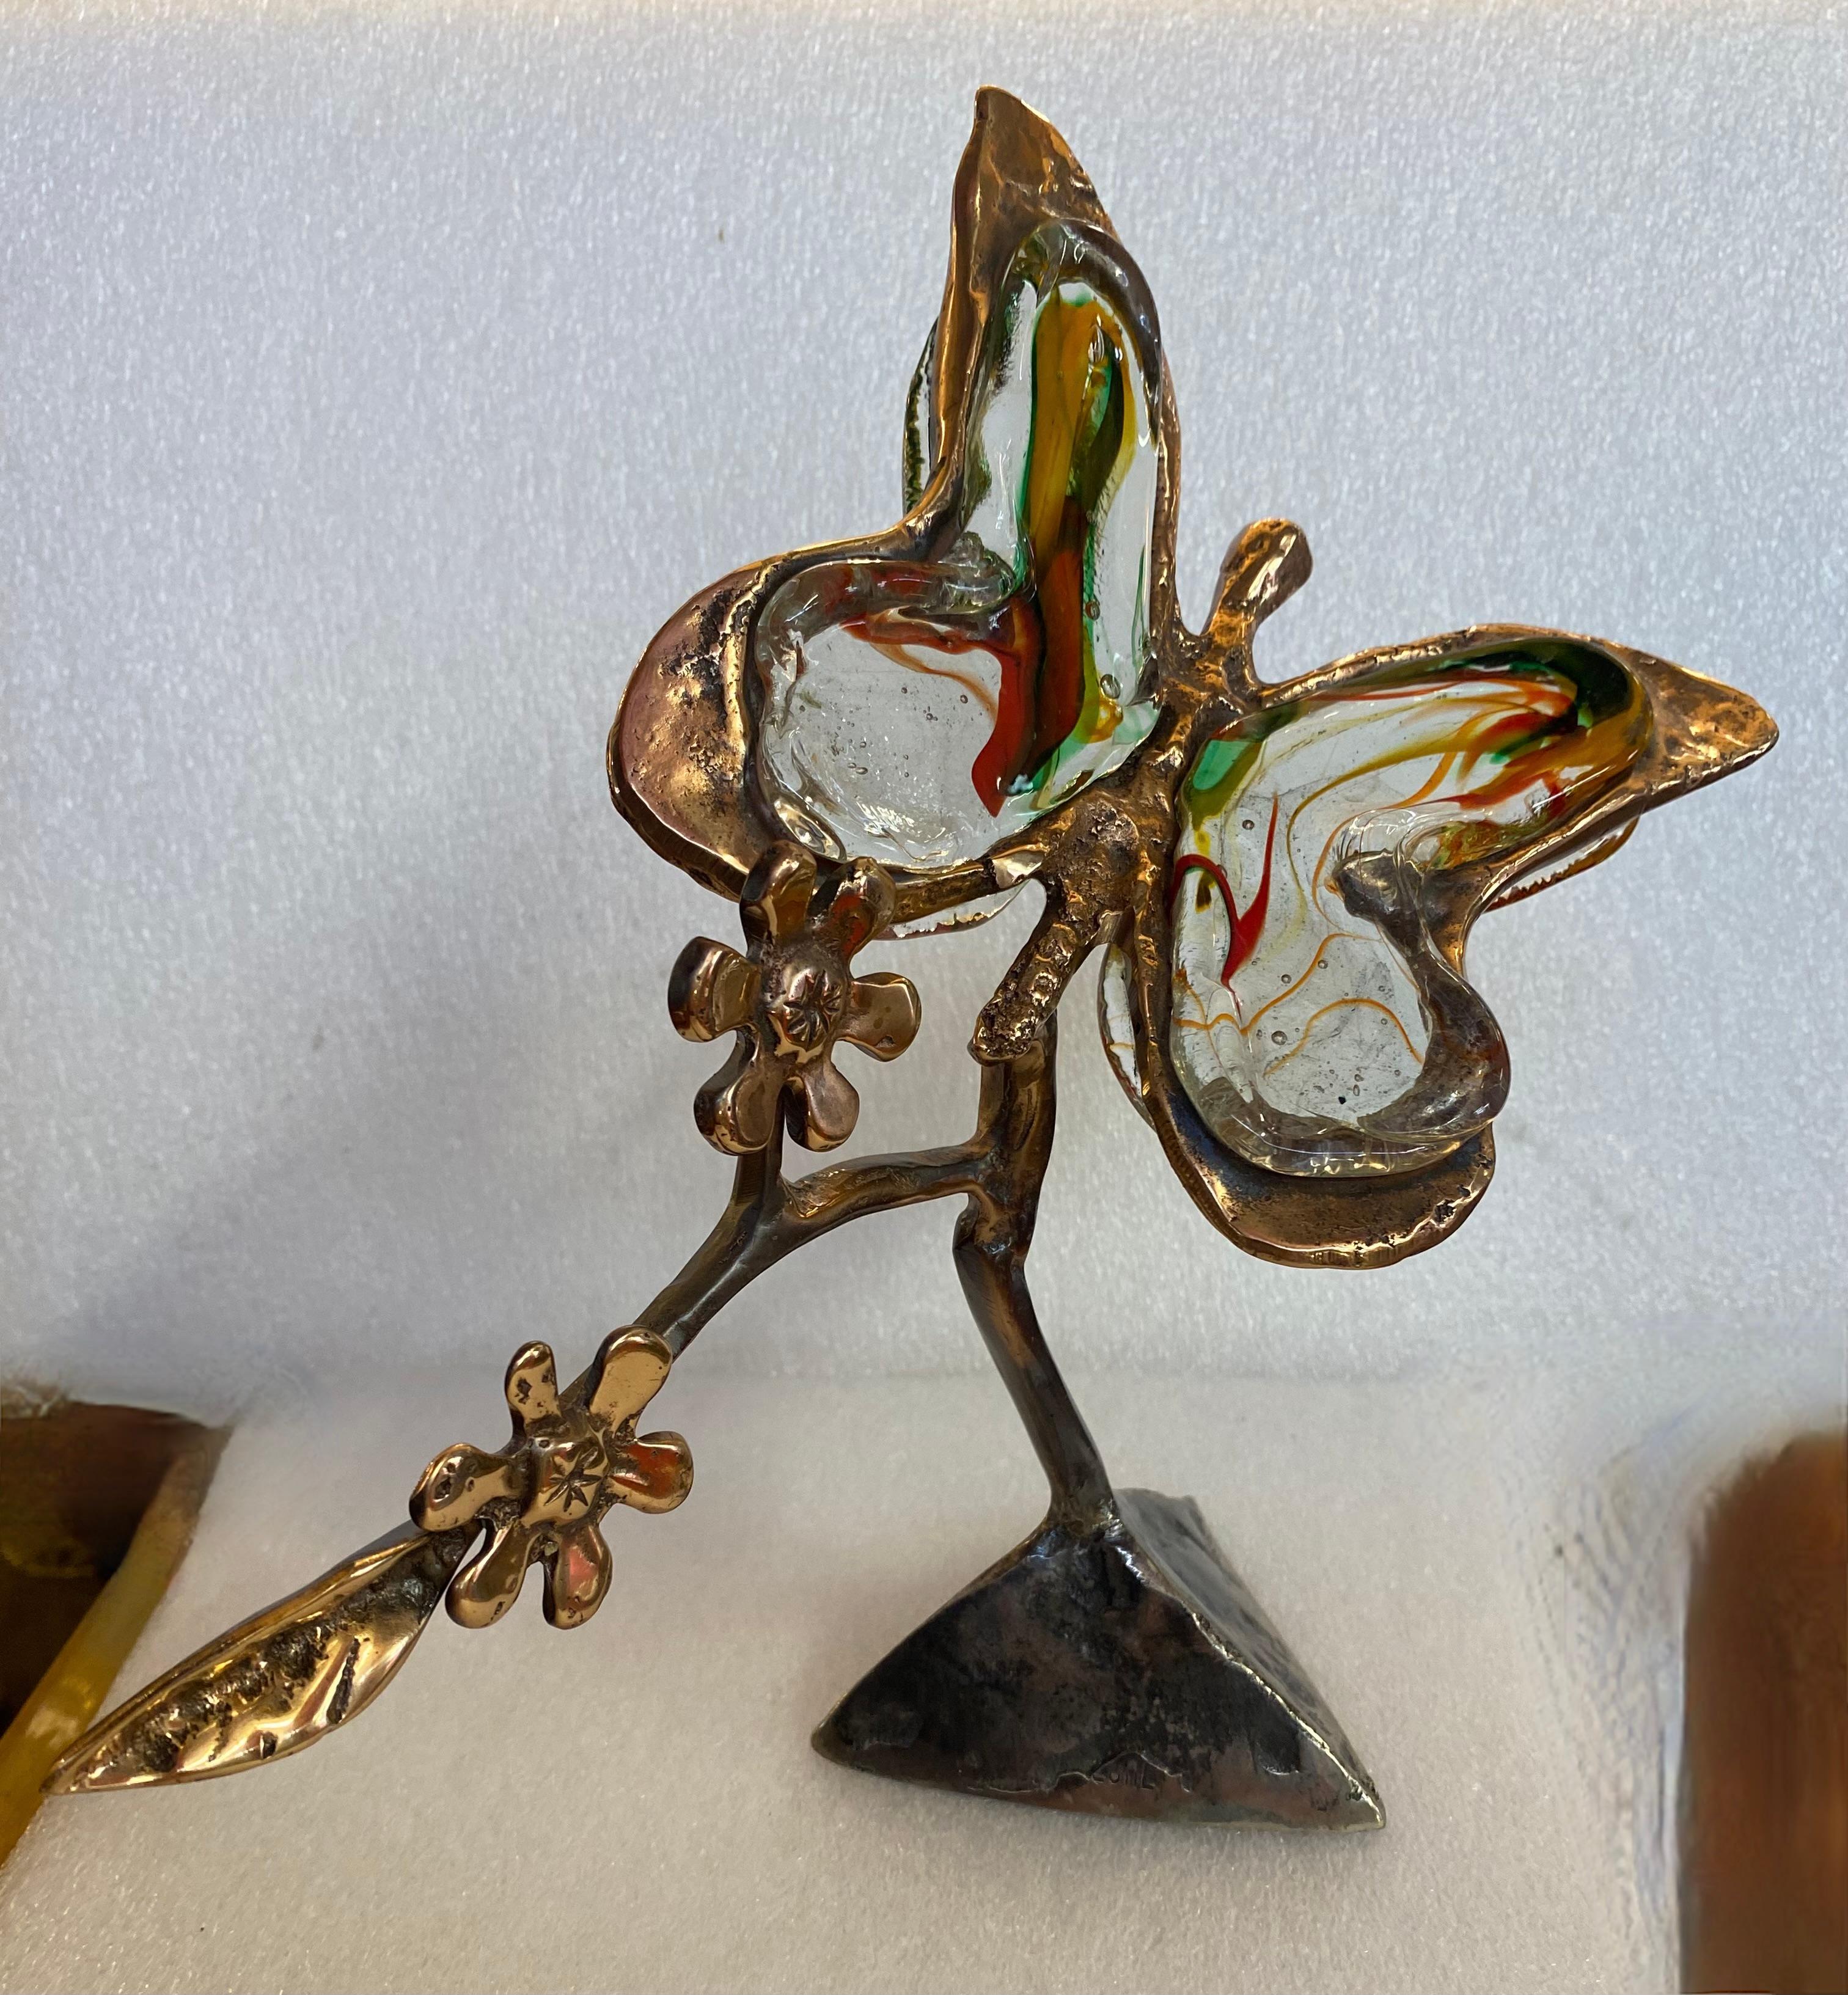 Butterfly-shaped sculpture in gilded bronze and glass paste signature LOHE Yves born in 1947, good condition, Circa 1970/80
Length:30 cm
Width: 17 cm
Height: 27 cm